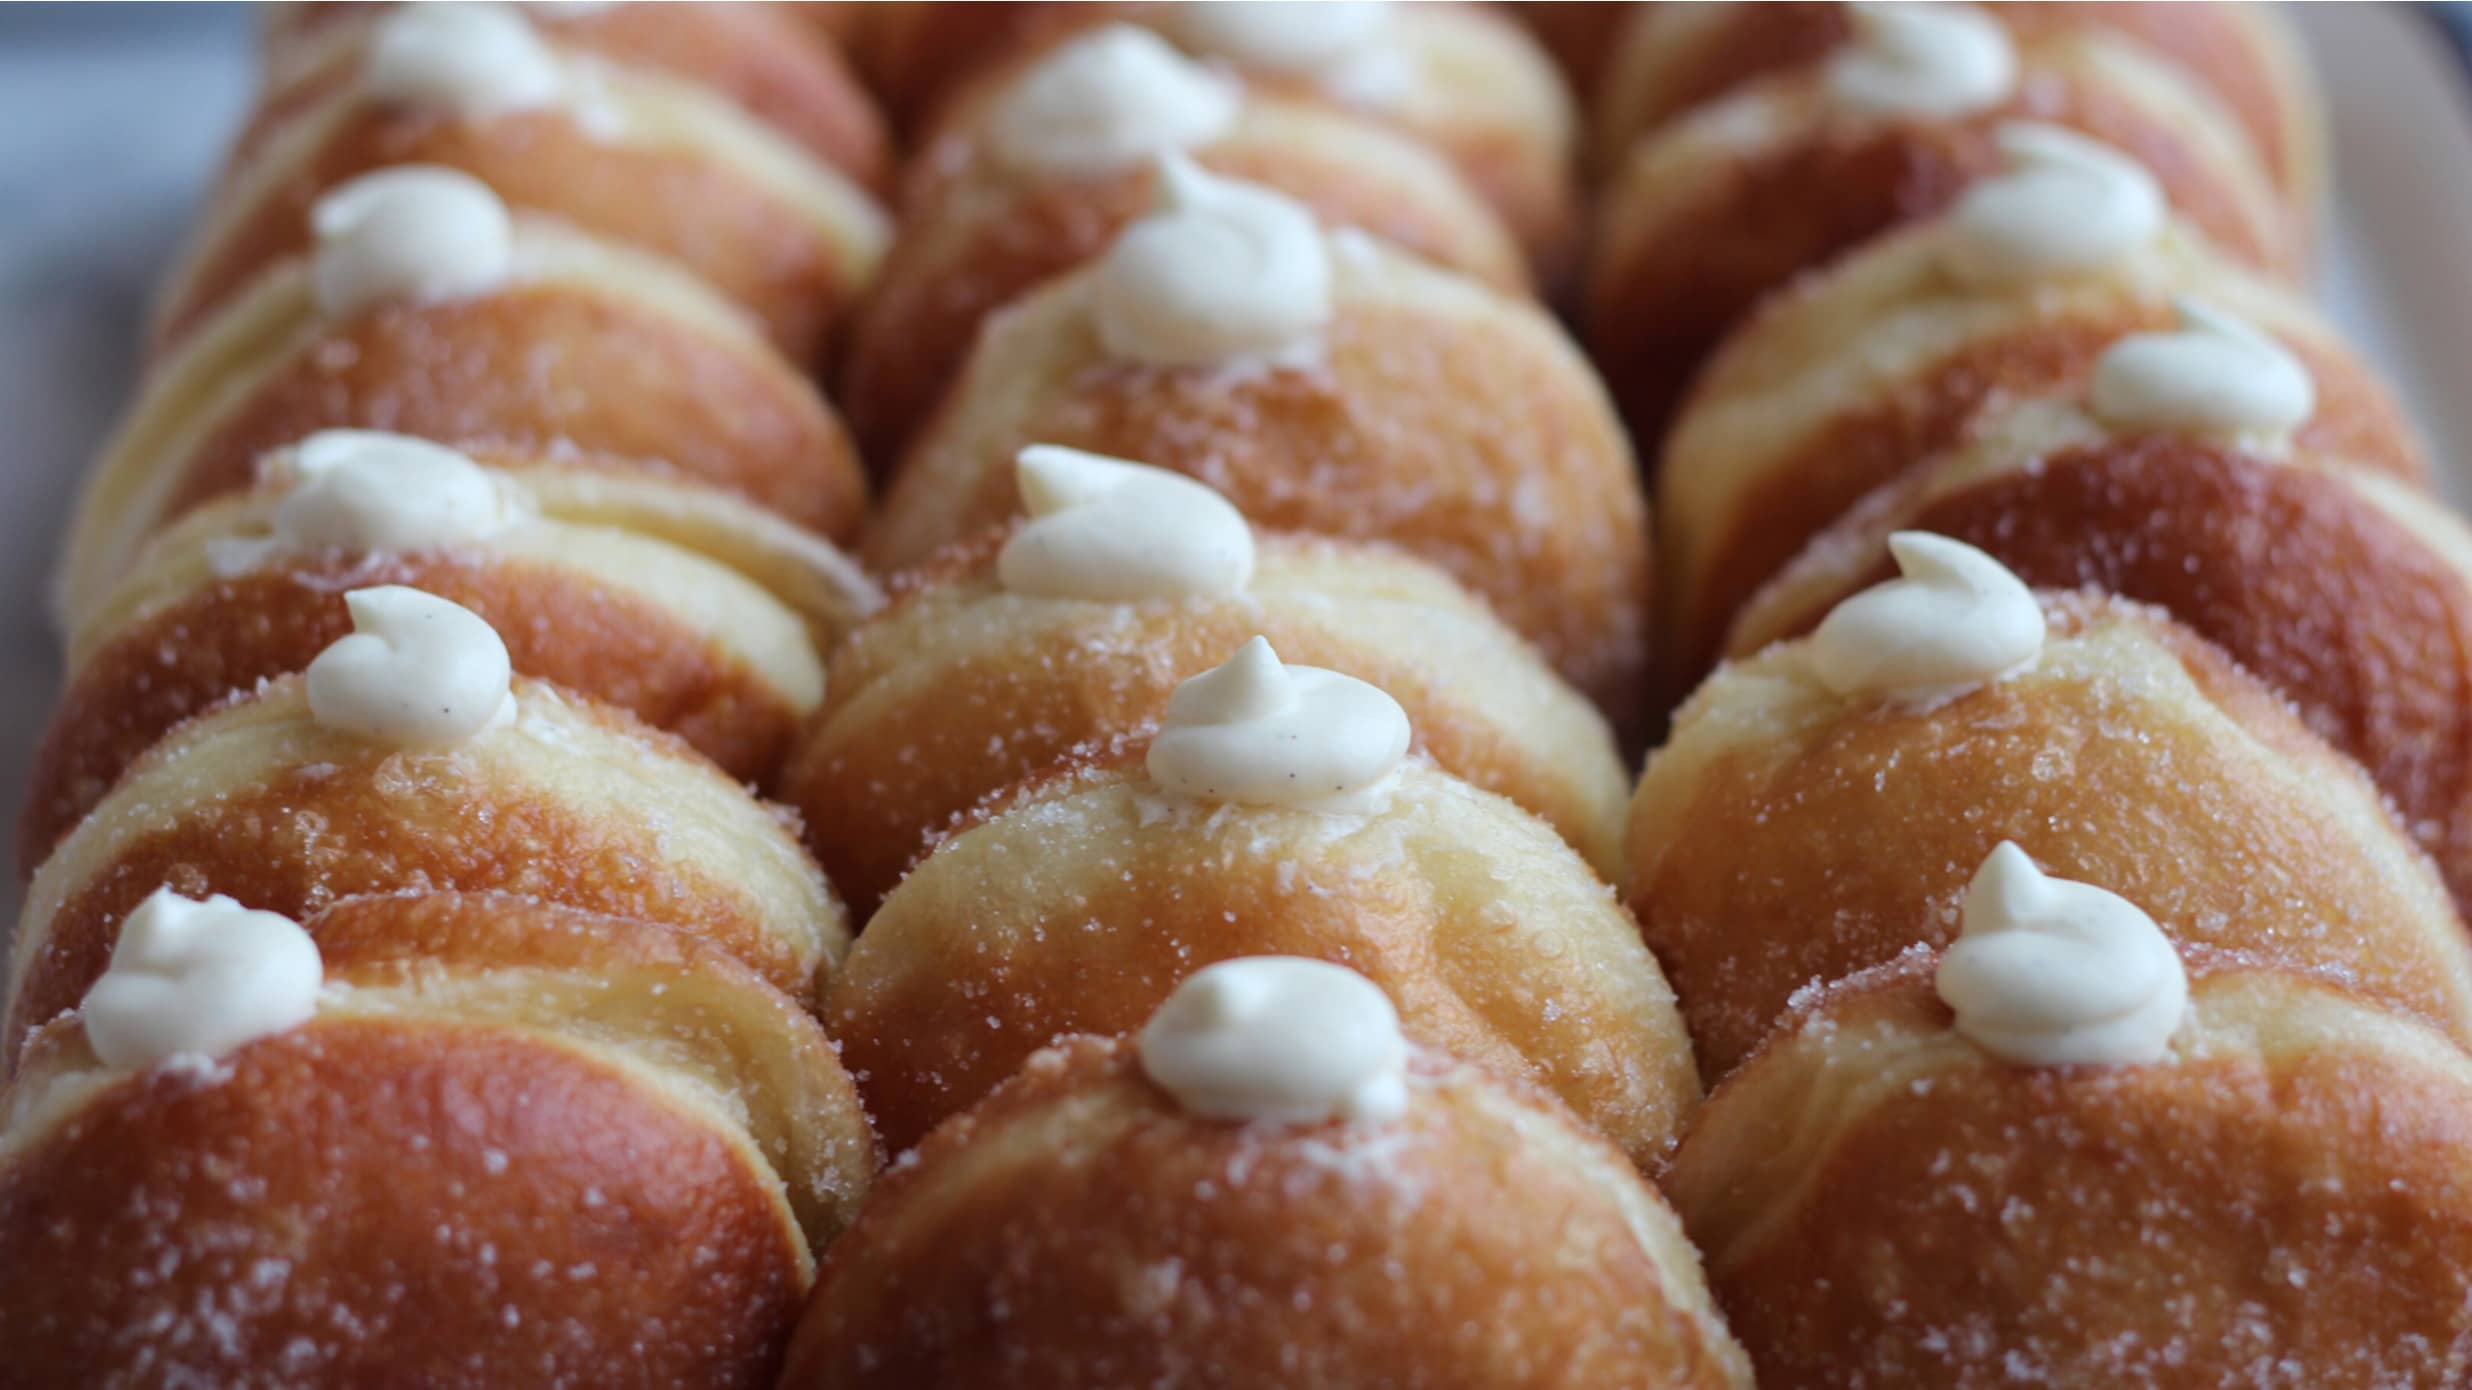 photo of an array of cream-filled donuts from General Porpoise